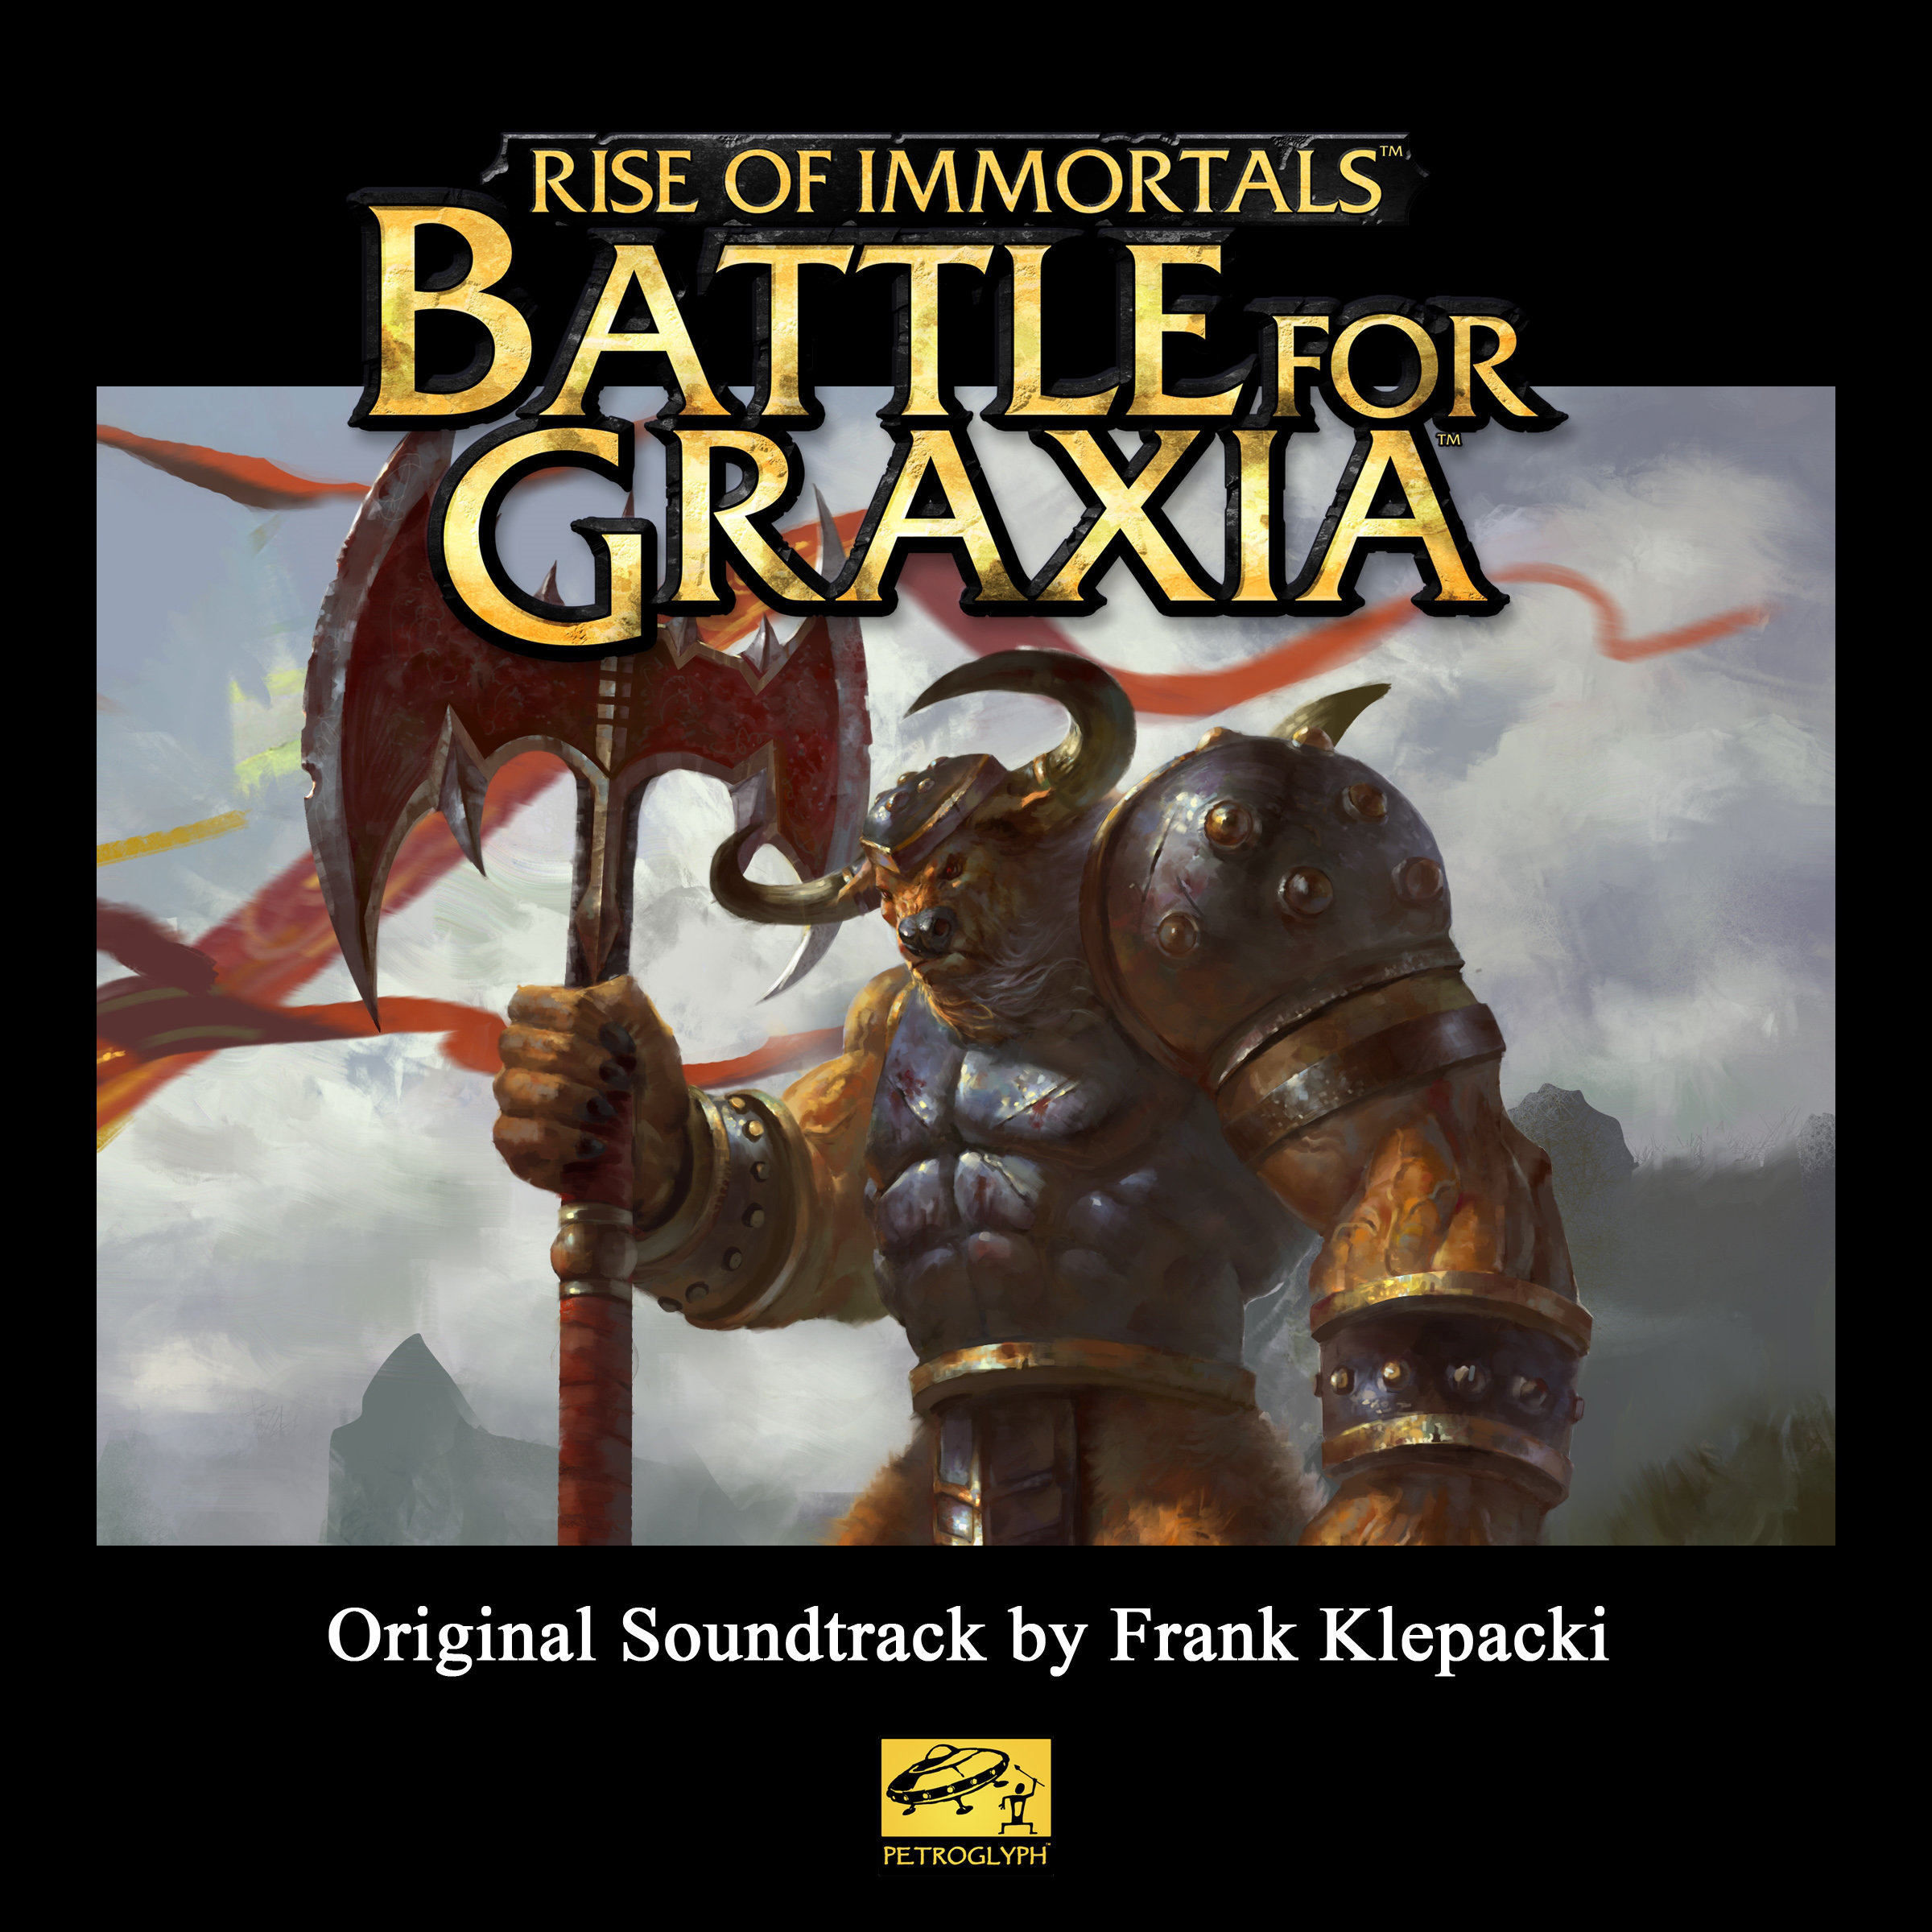 Rise of Immortals. Фрэнк Клепаки. Immortal Battles in the North обложка. Battle of the Immortal Атлантида карта. Boi на русском